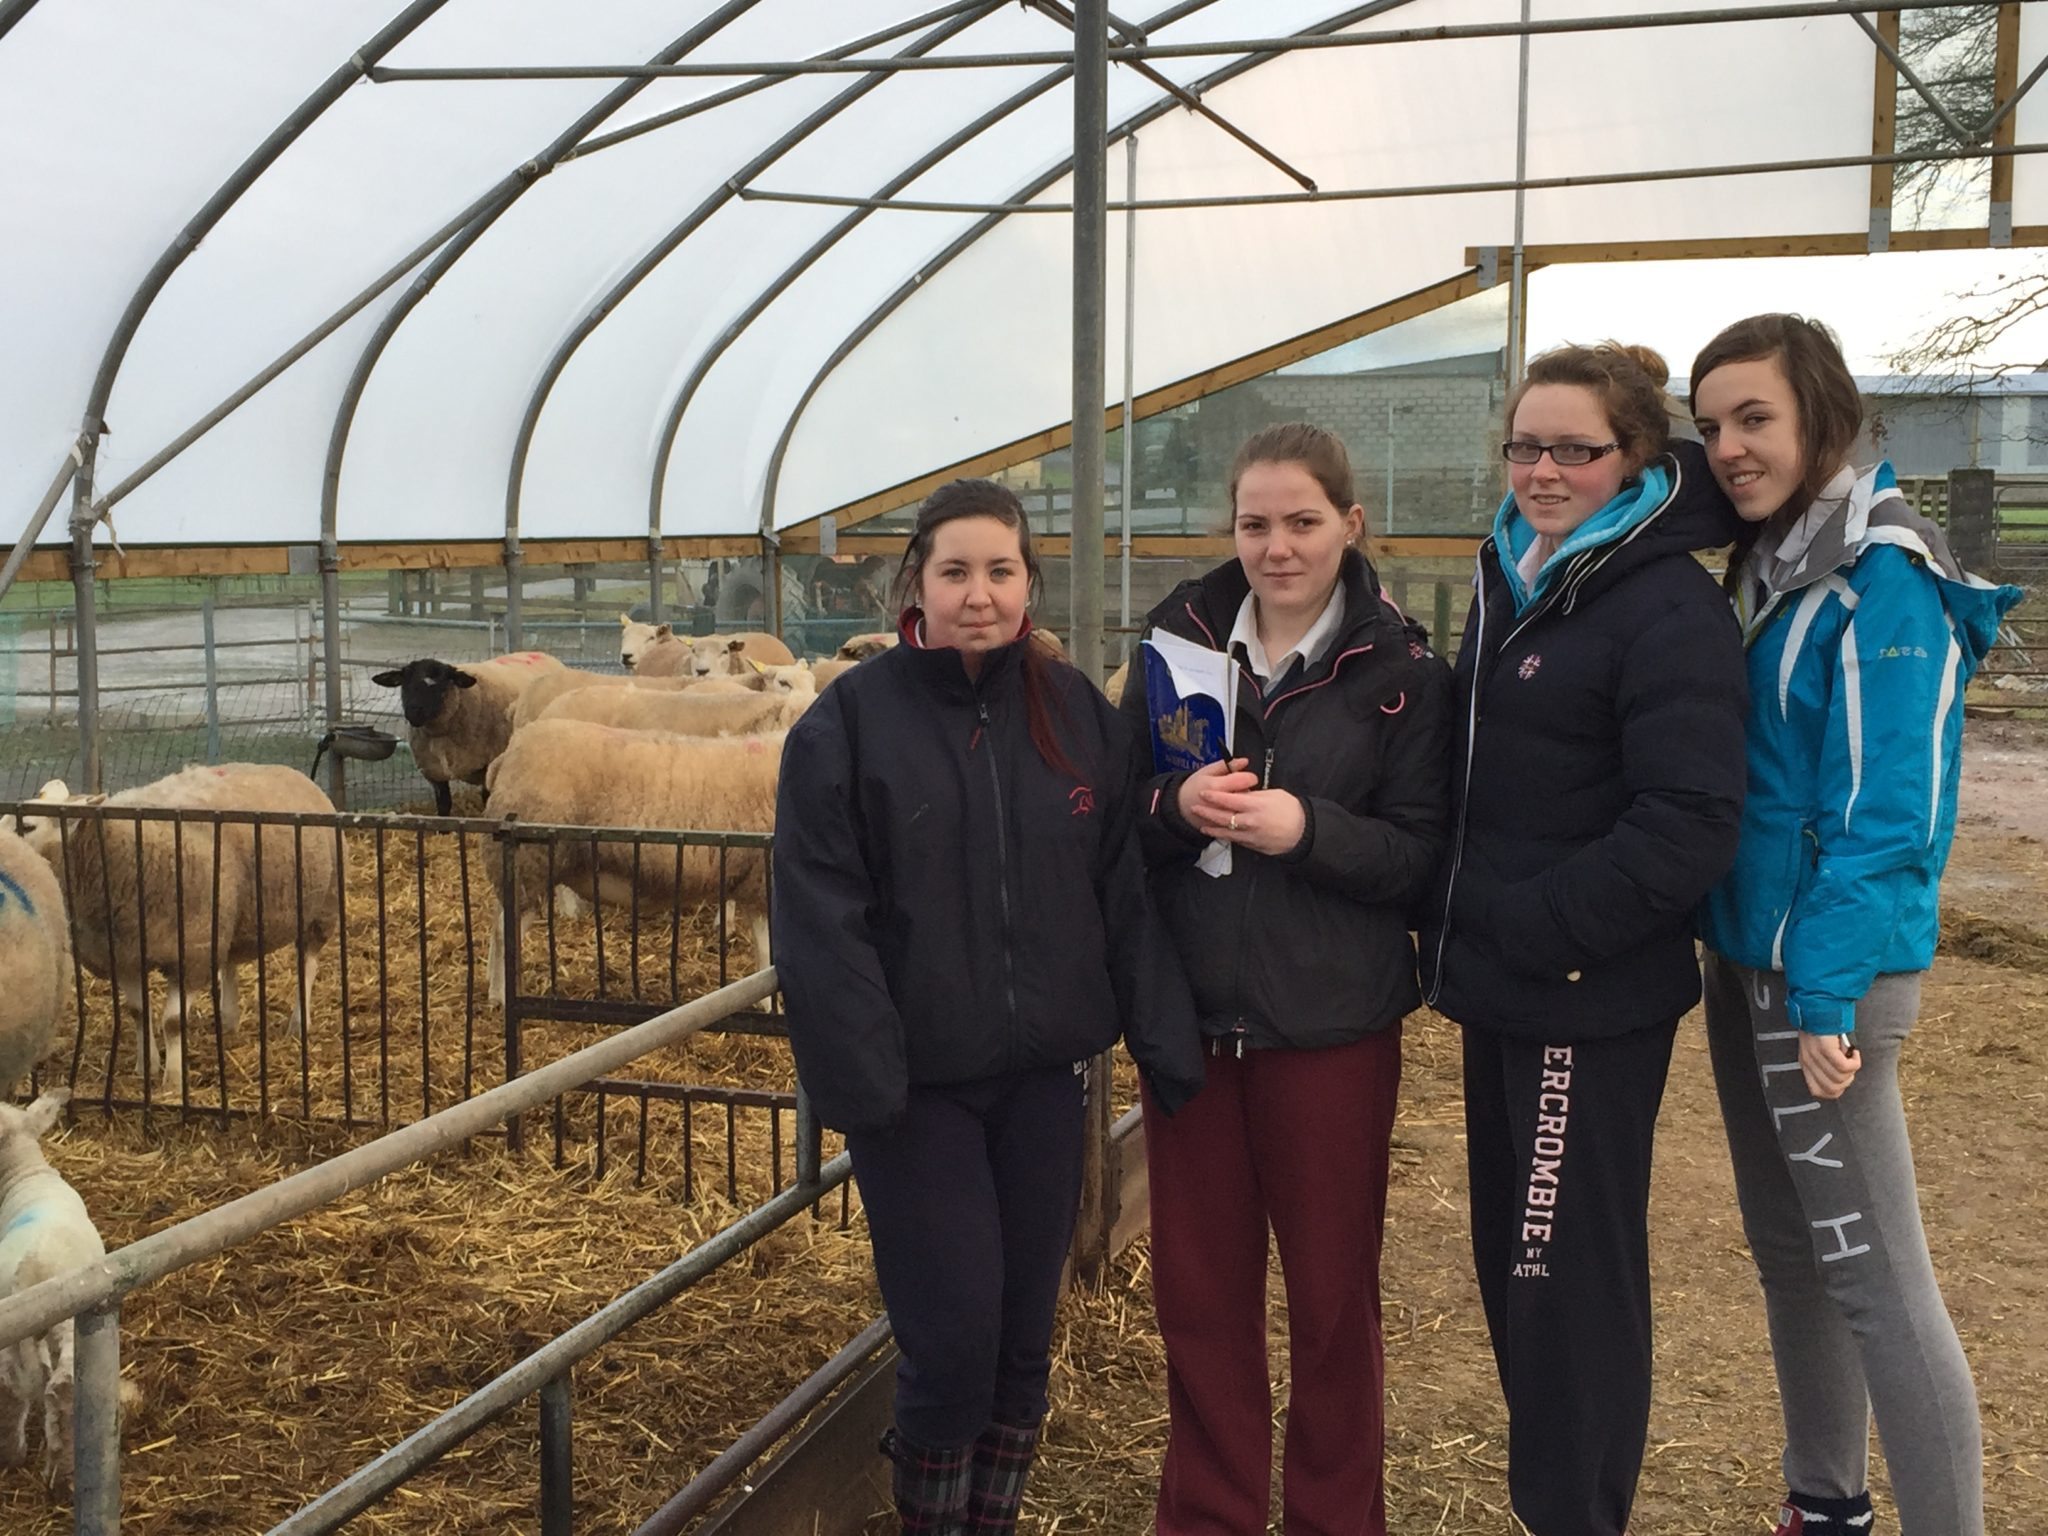 6th Year Desmond College students Claire Scanlon, Siobhan Moloney, Claire Collum and Shauna Hough study the Sheep Farm at Pallaskenry Agricultural College.